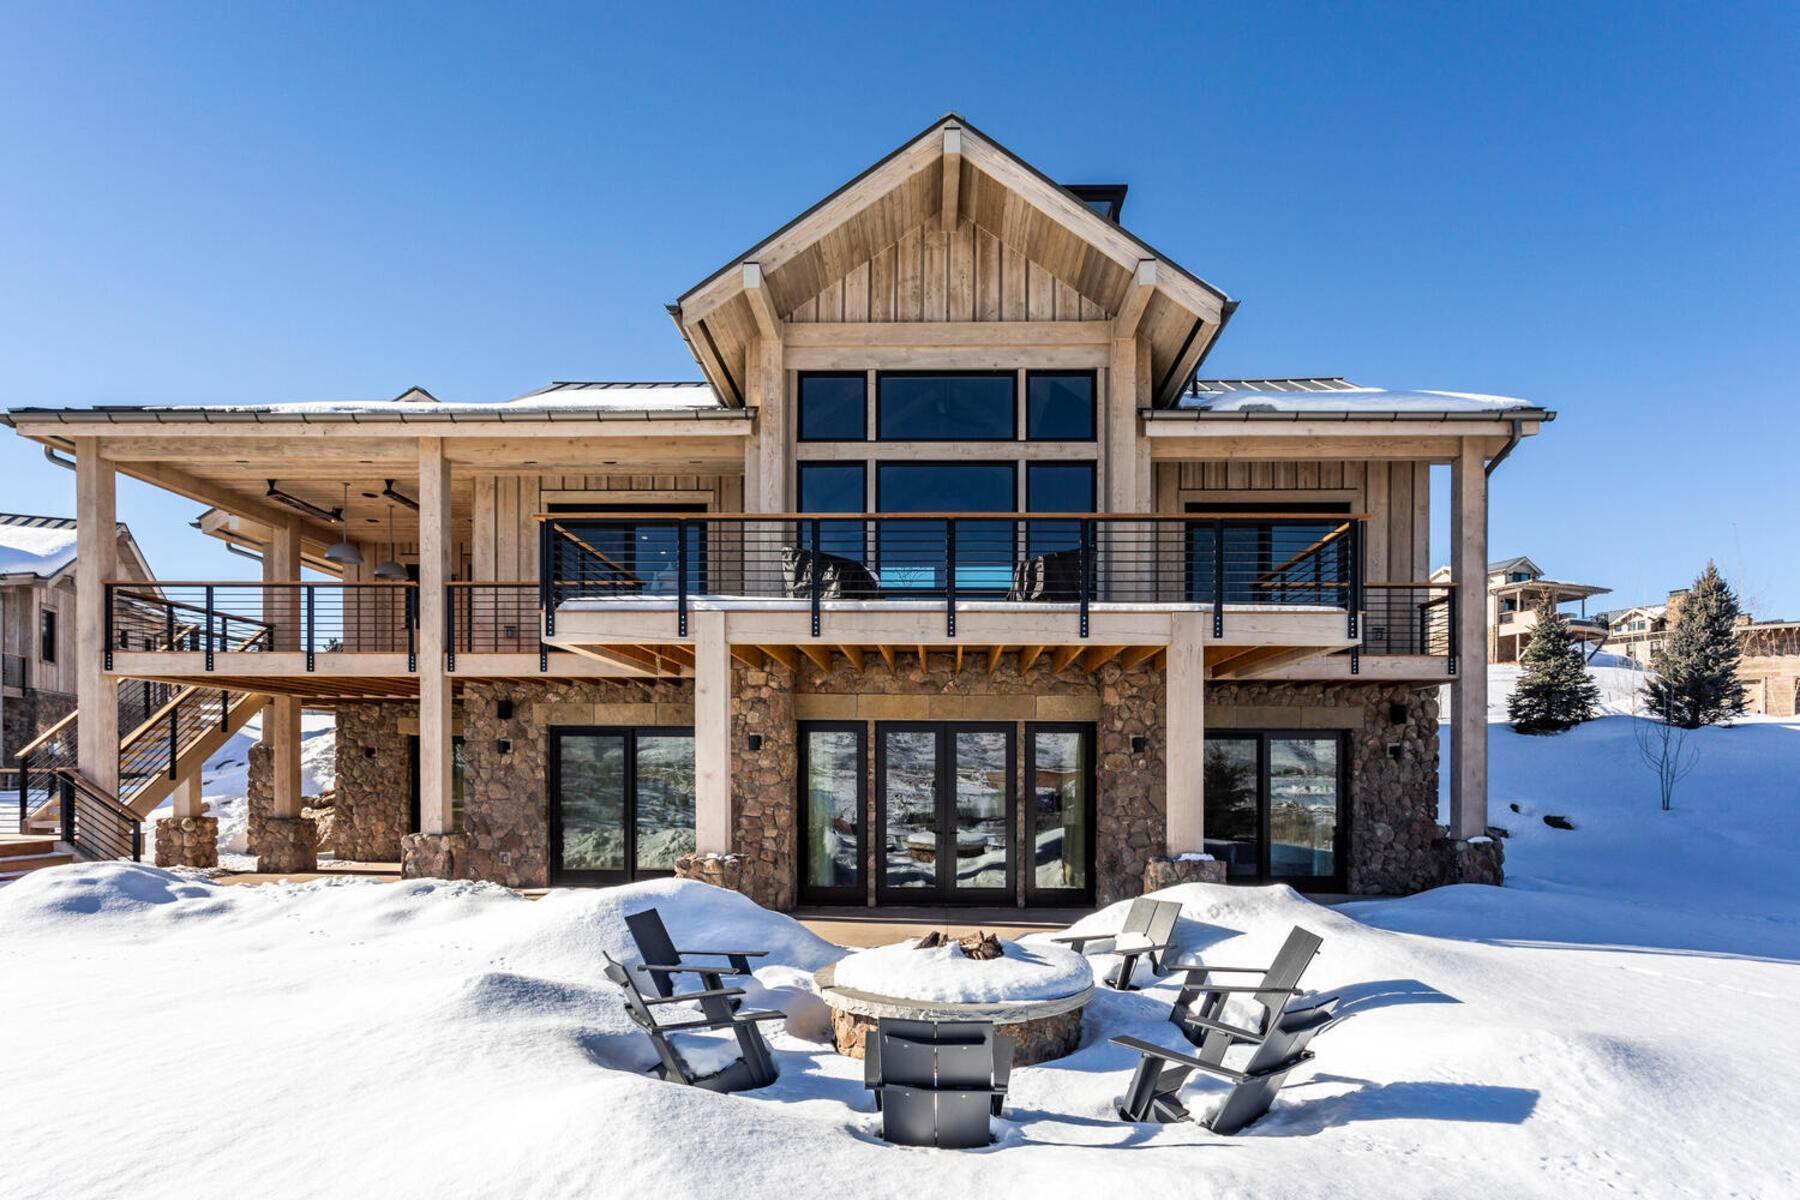 Fractional Ownership Property for Sale at 1/8 Fractional Ownership Opportunity In Brand New Kingfisher Cabin 7767 E Stardust Court #321H, 5.32 Heber City, Utah 84032 United States